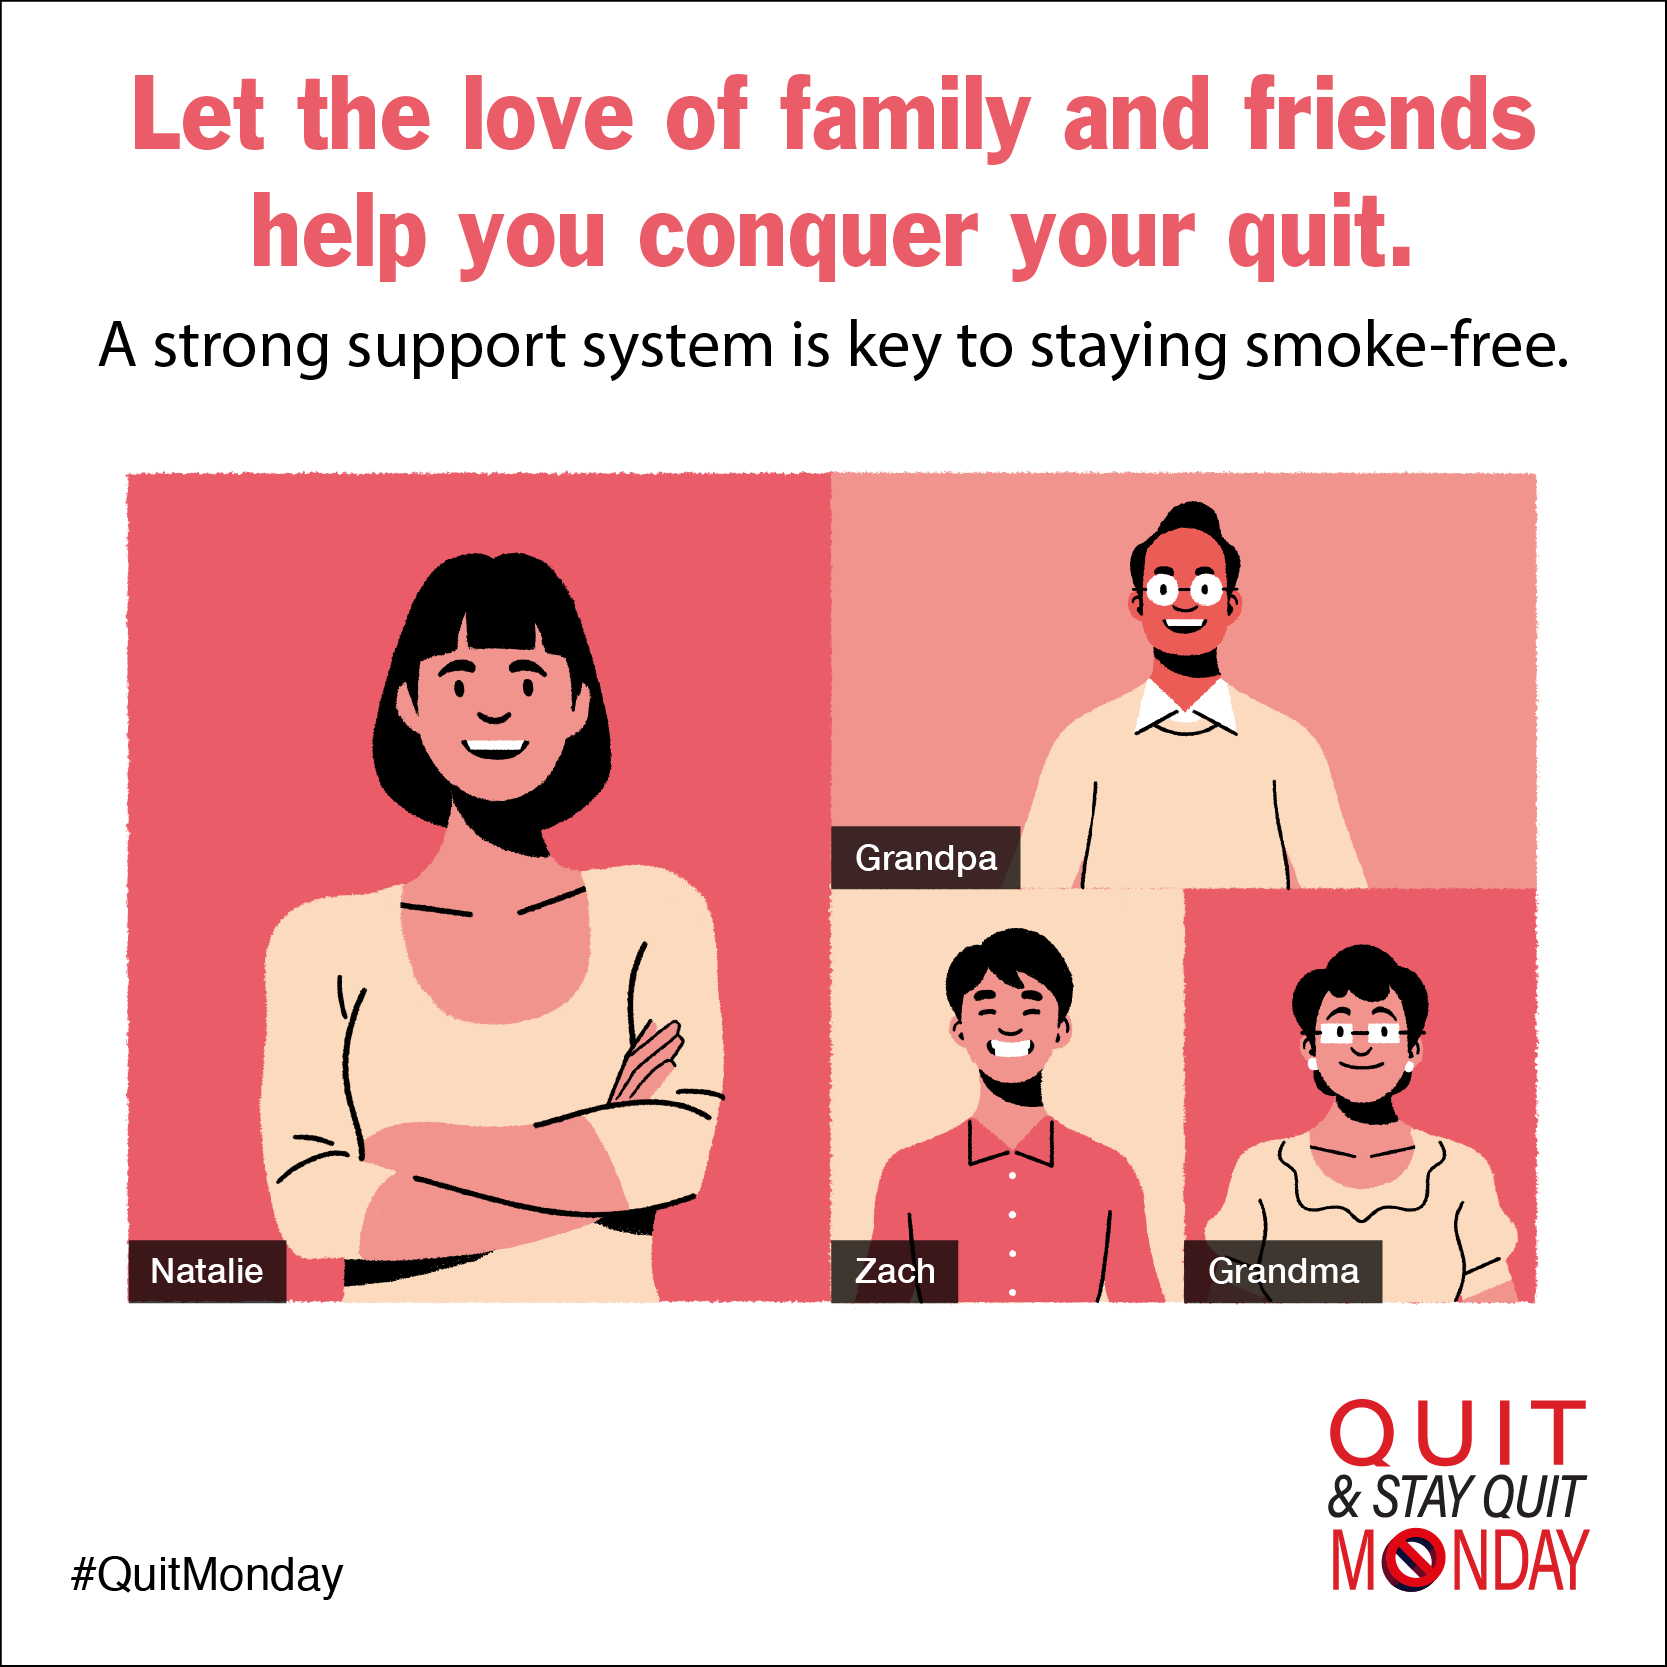 Let the love of family and friends help you conquer your quit. A strong support system is key to staying smoke-free.